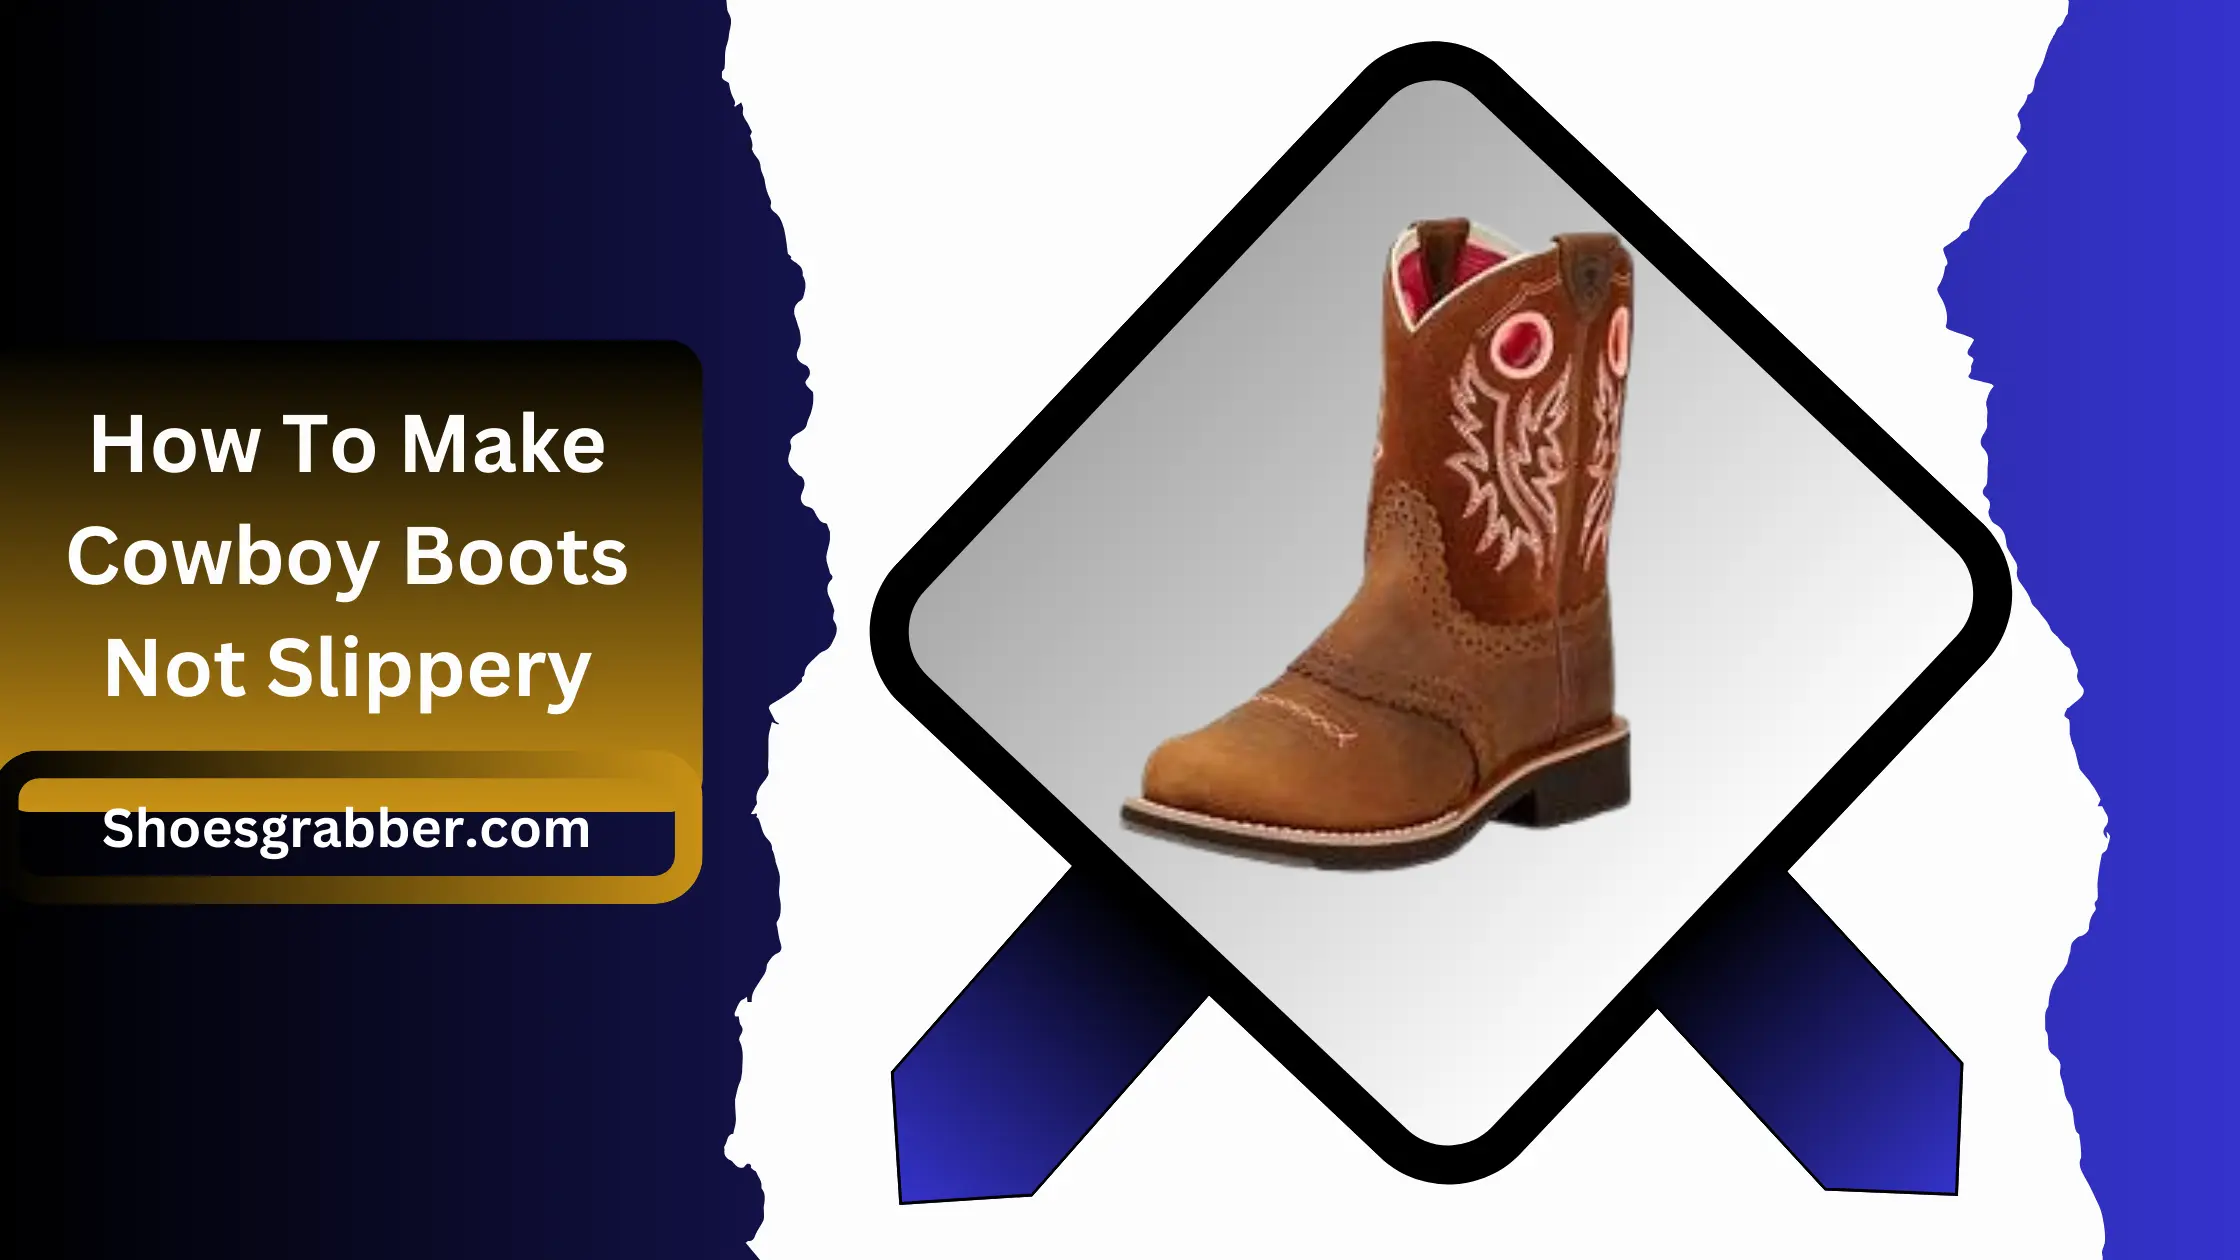 How To Make Cowboy Boots Not Slippery - The Ultimate Guide